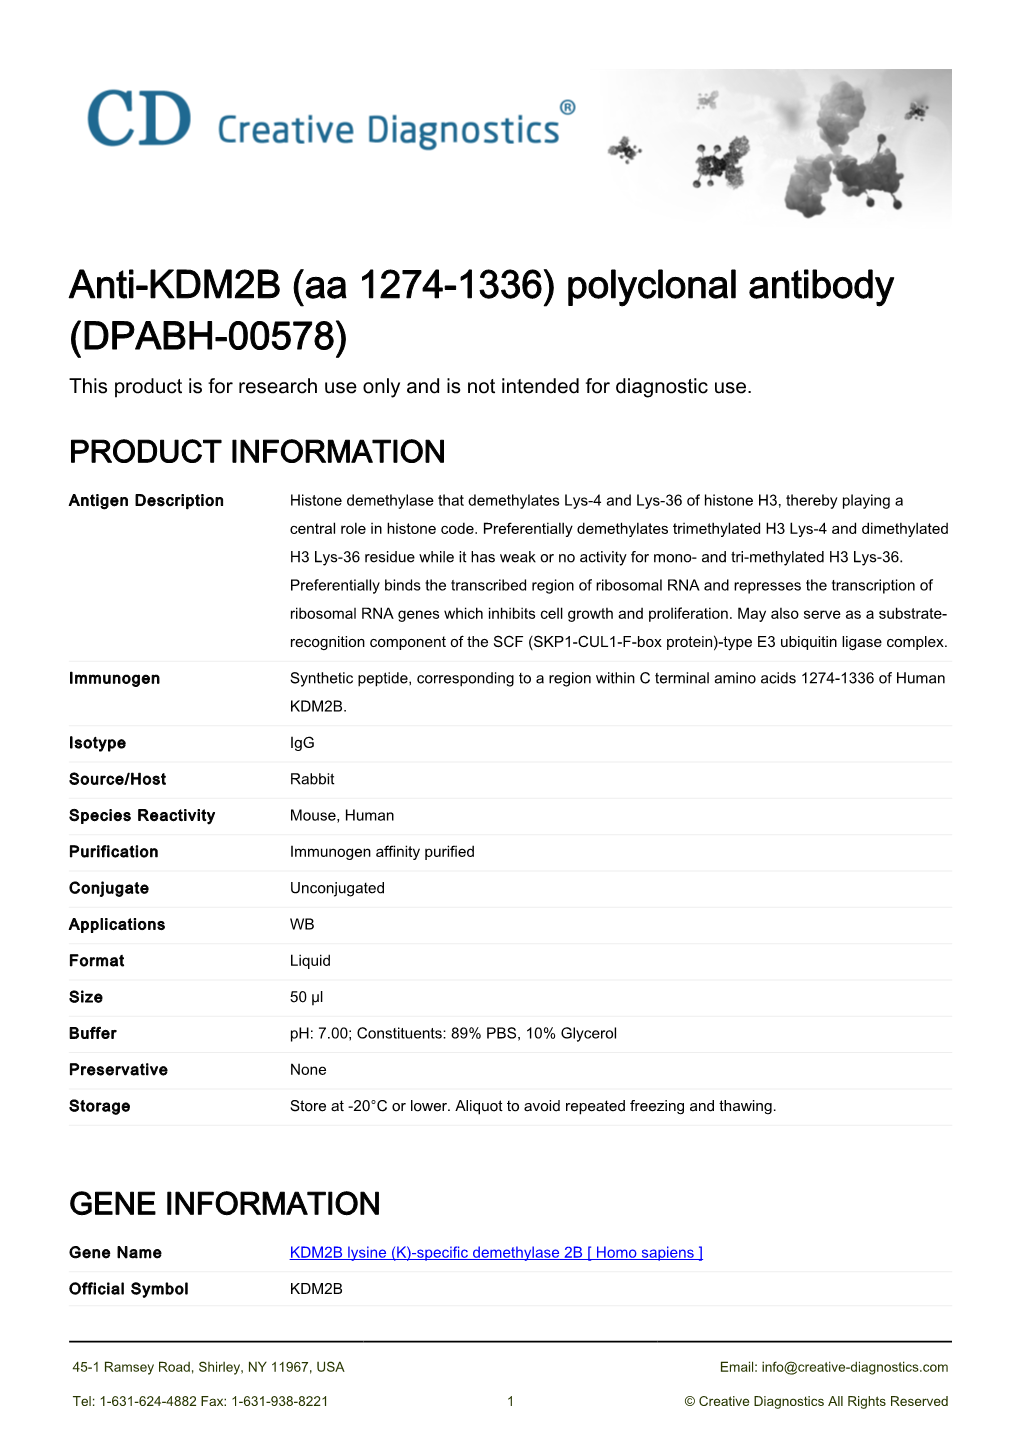 Anti-KDM2B (Aa 1274-1336) Polyclonal Antibody (DPABH-00578) This Product Is for Research Use Only and Is Not Intended for Diagnostic Use